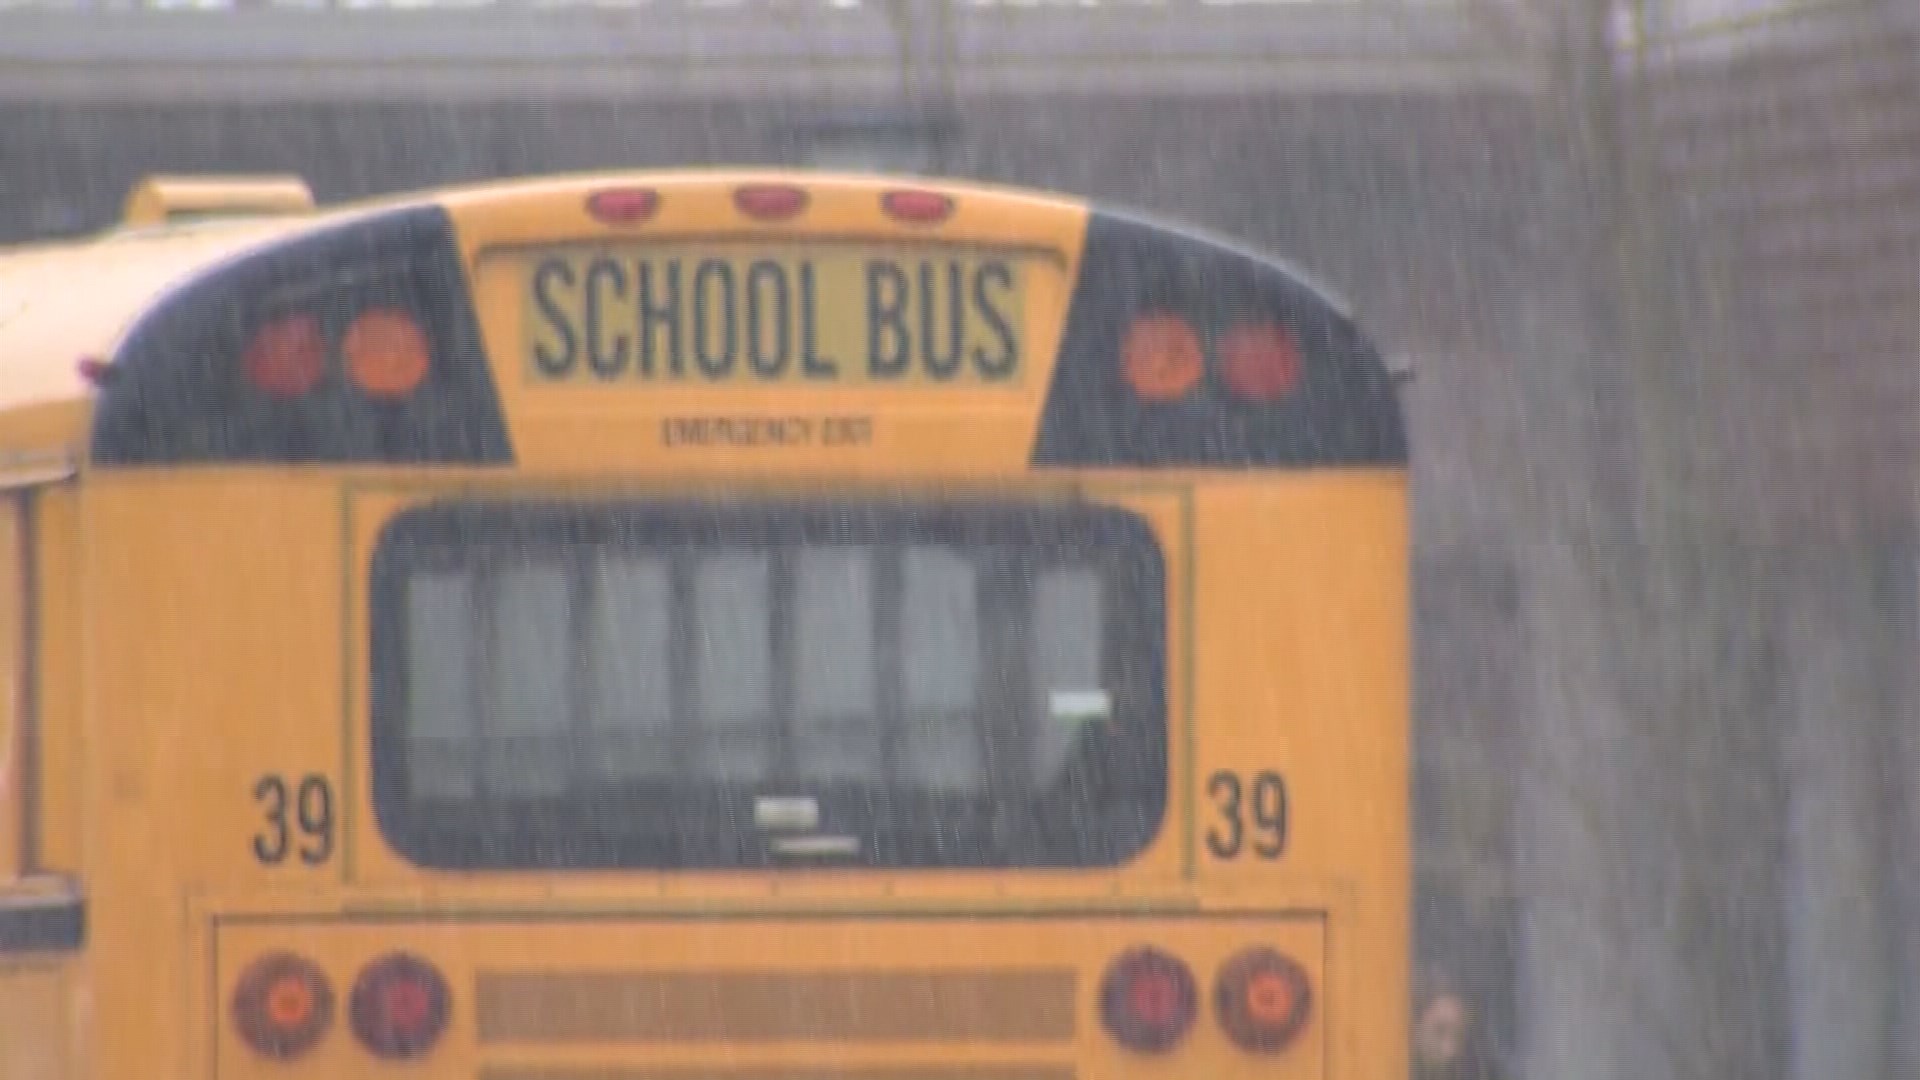 Several school districts announce delayed starts due to winter weather: Storm impacts